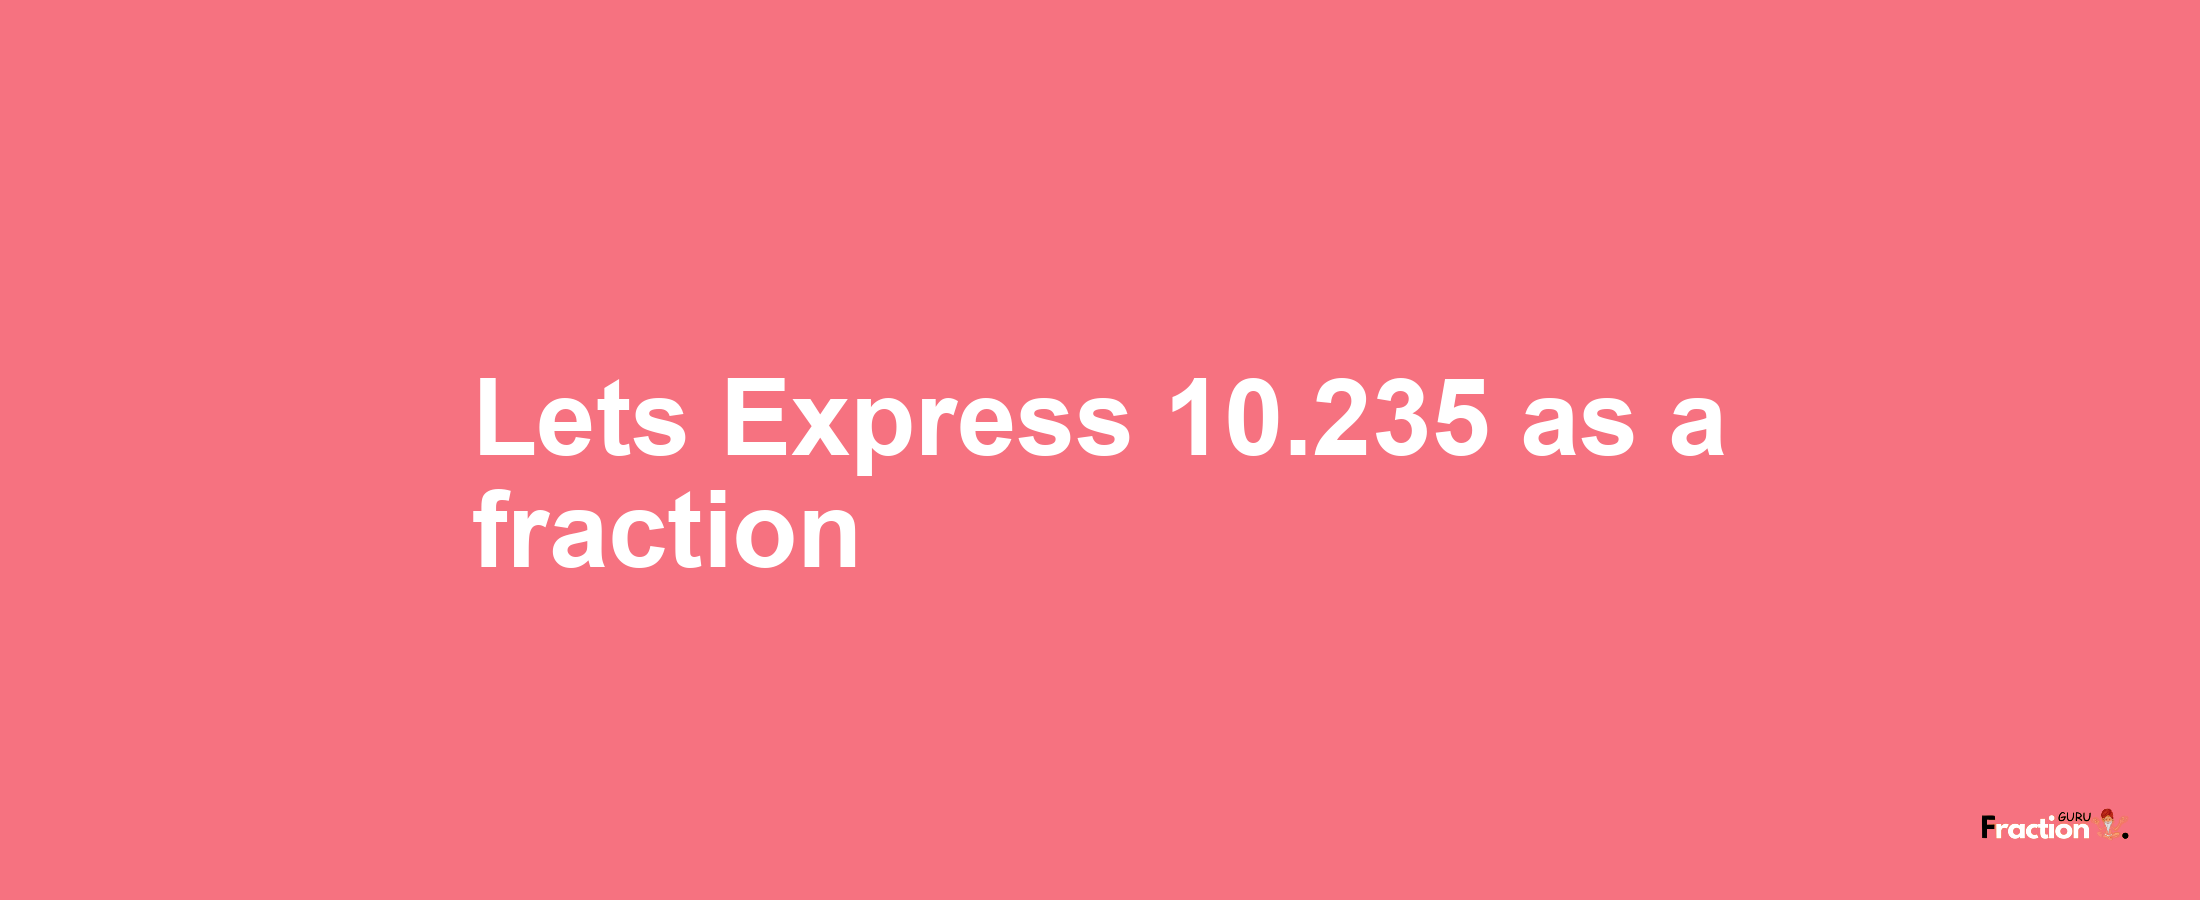 Lets Express 10.235 as afraction